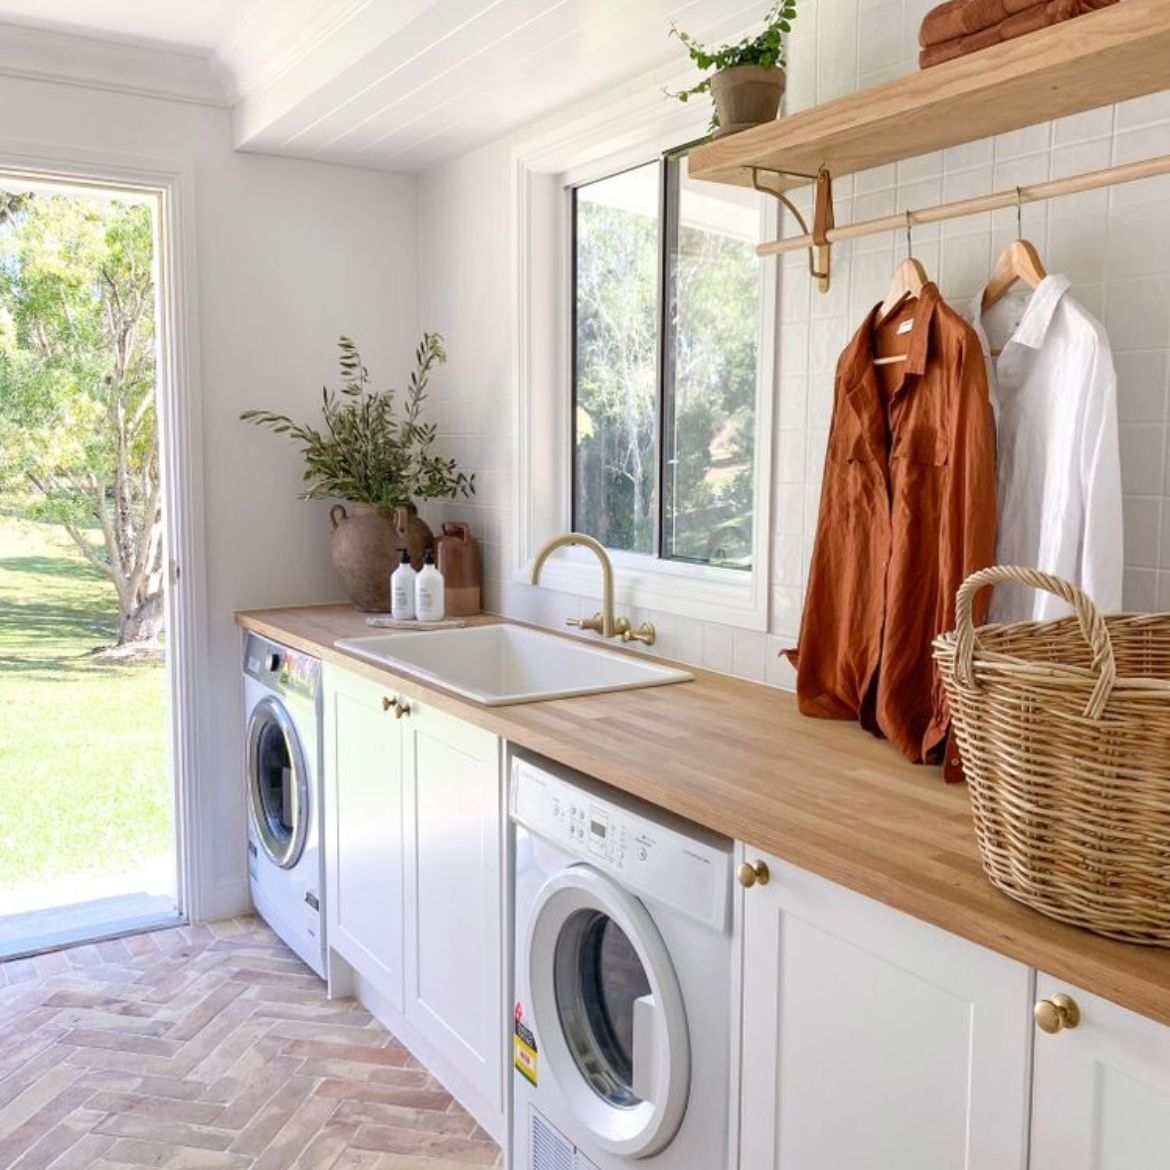 Top 10 most popular laundry projects | Bunnings Workshop community